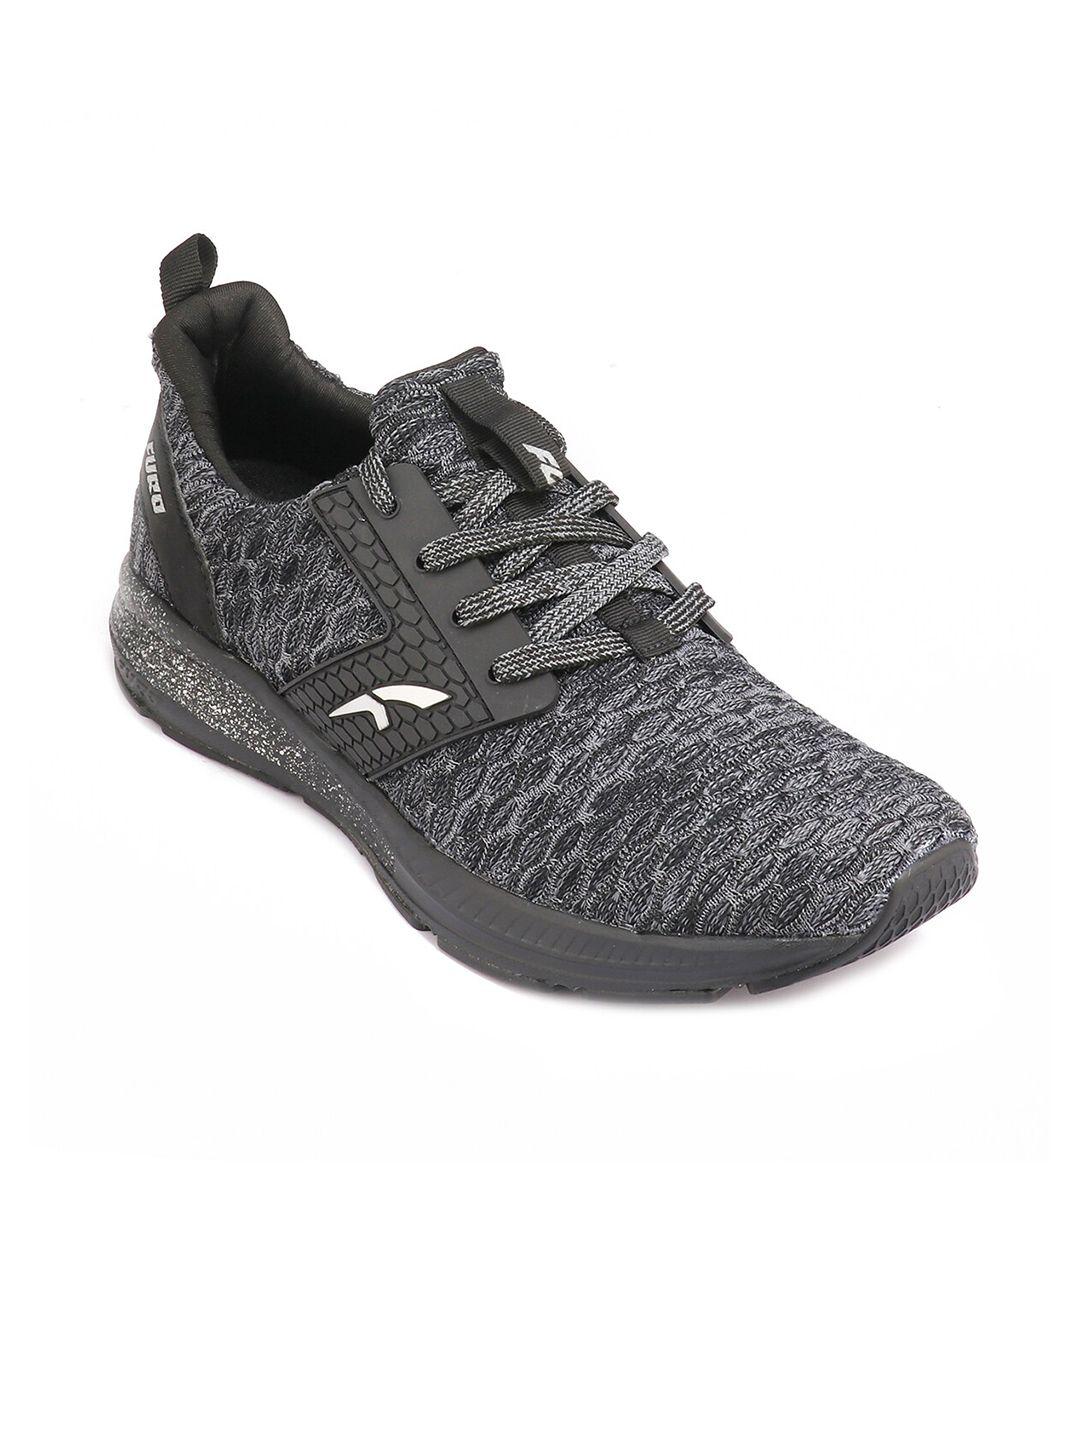 furo by red chief men black & grey running shoes